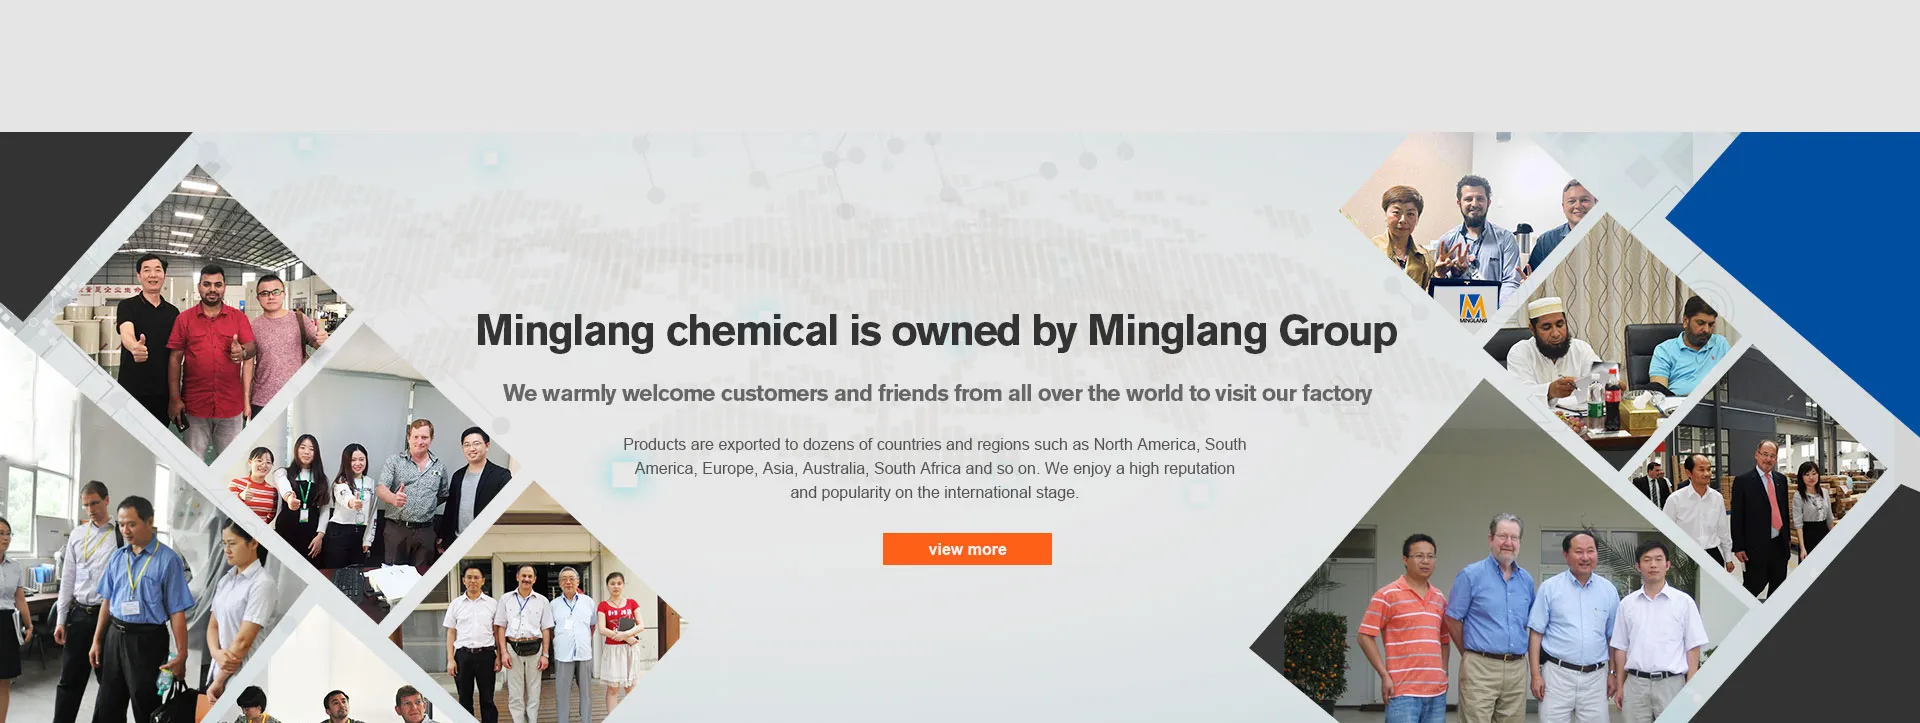 Minglang chemical is owned by Minglang Group